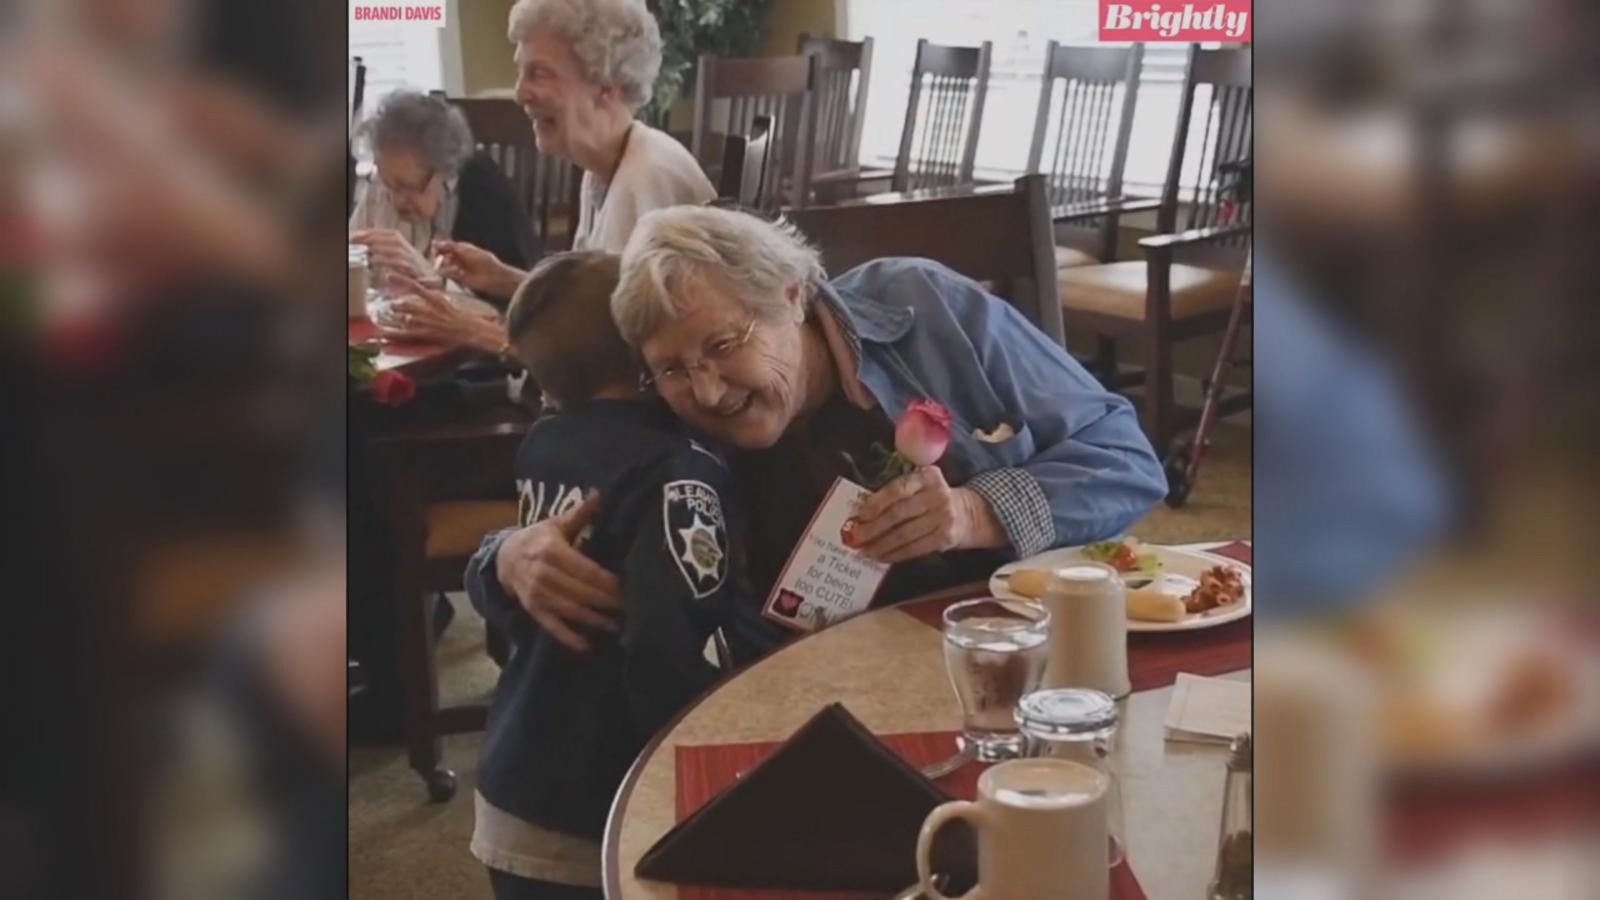 A 6-year-old boy is bringing smiles to the faces of the elderly residents of his local nursing home.